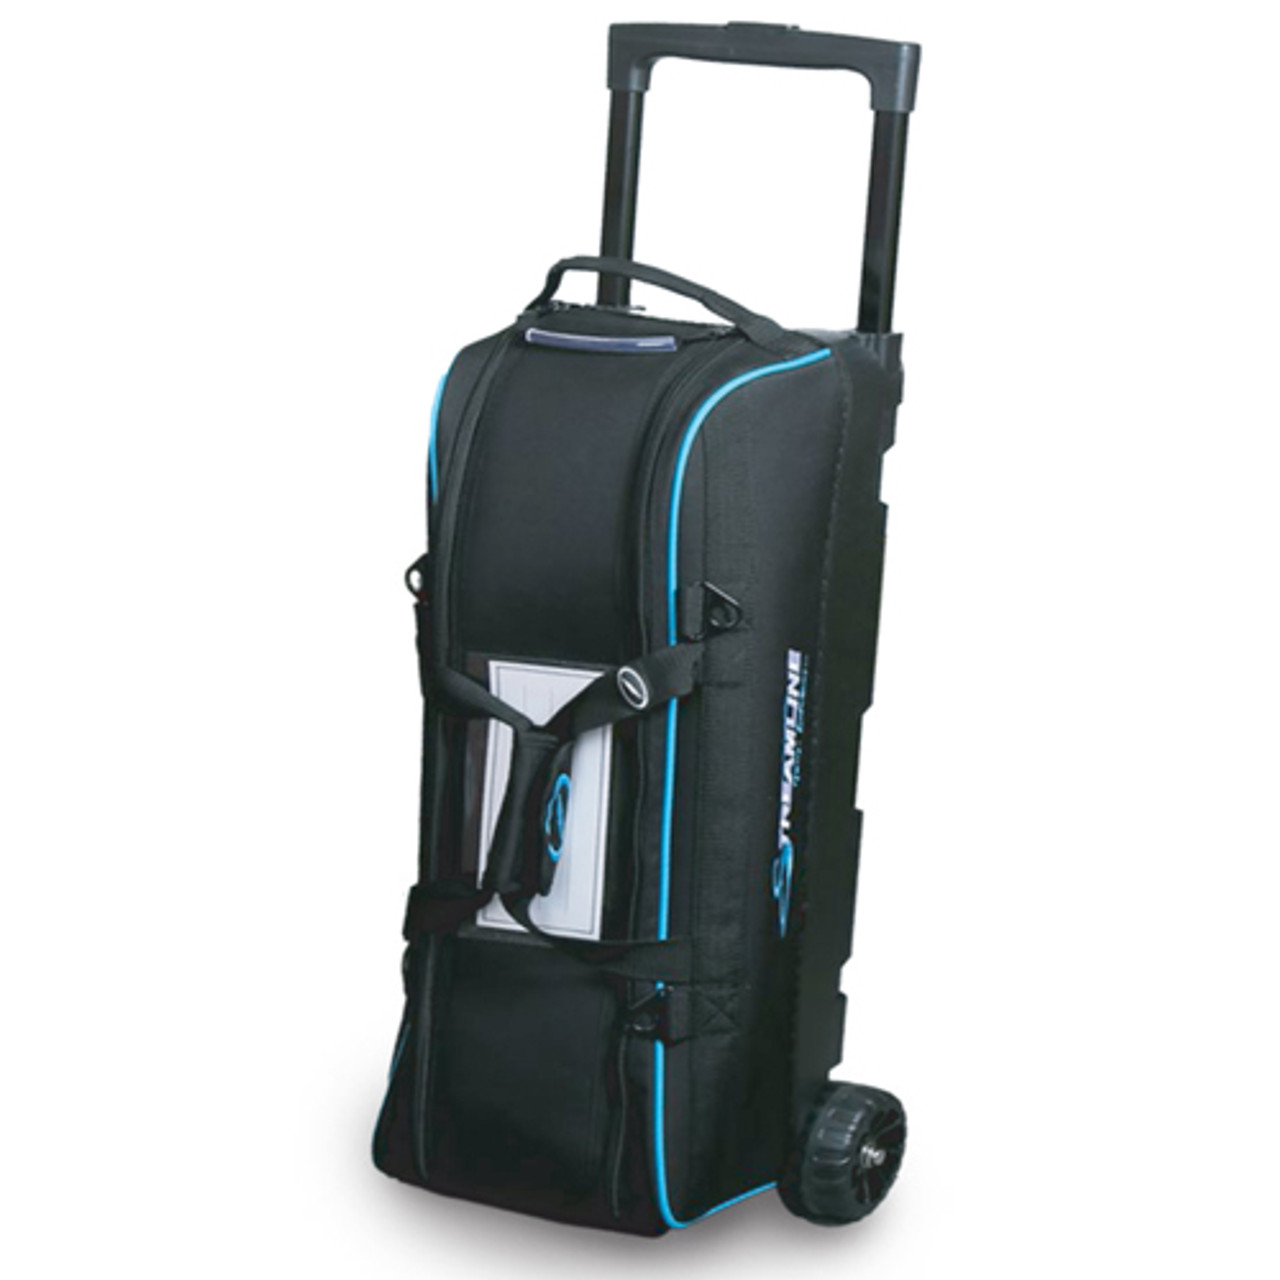 Storm 3 Ball Inline Roller Bowling Bag - Tour Edition - Black/Blue FREE  SHIPPING 